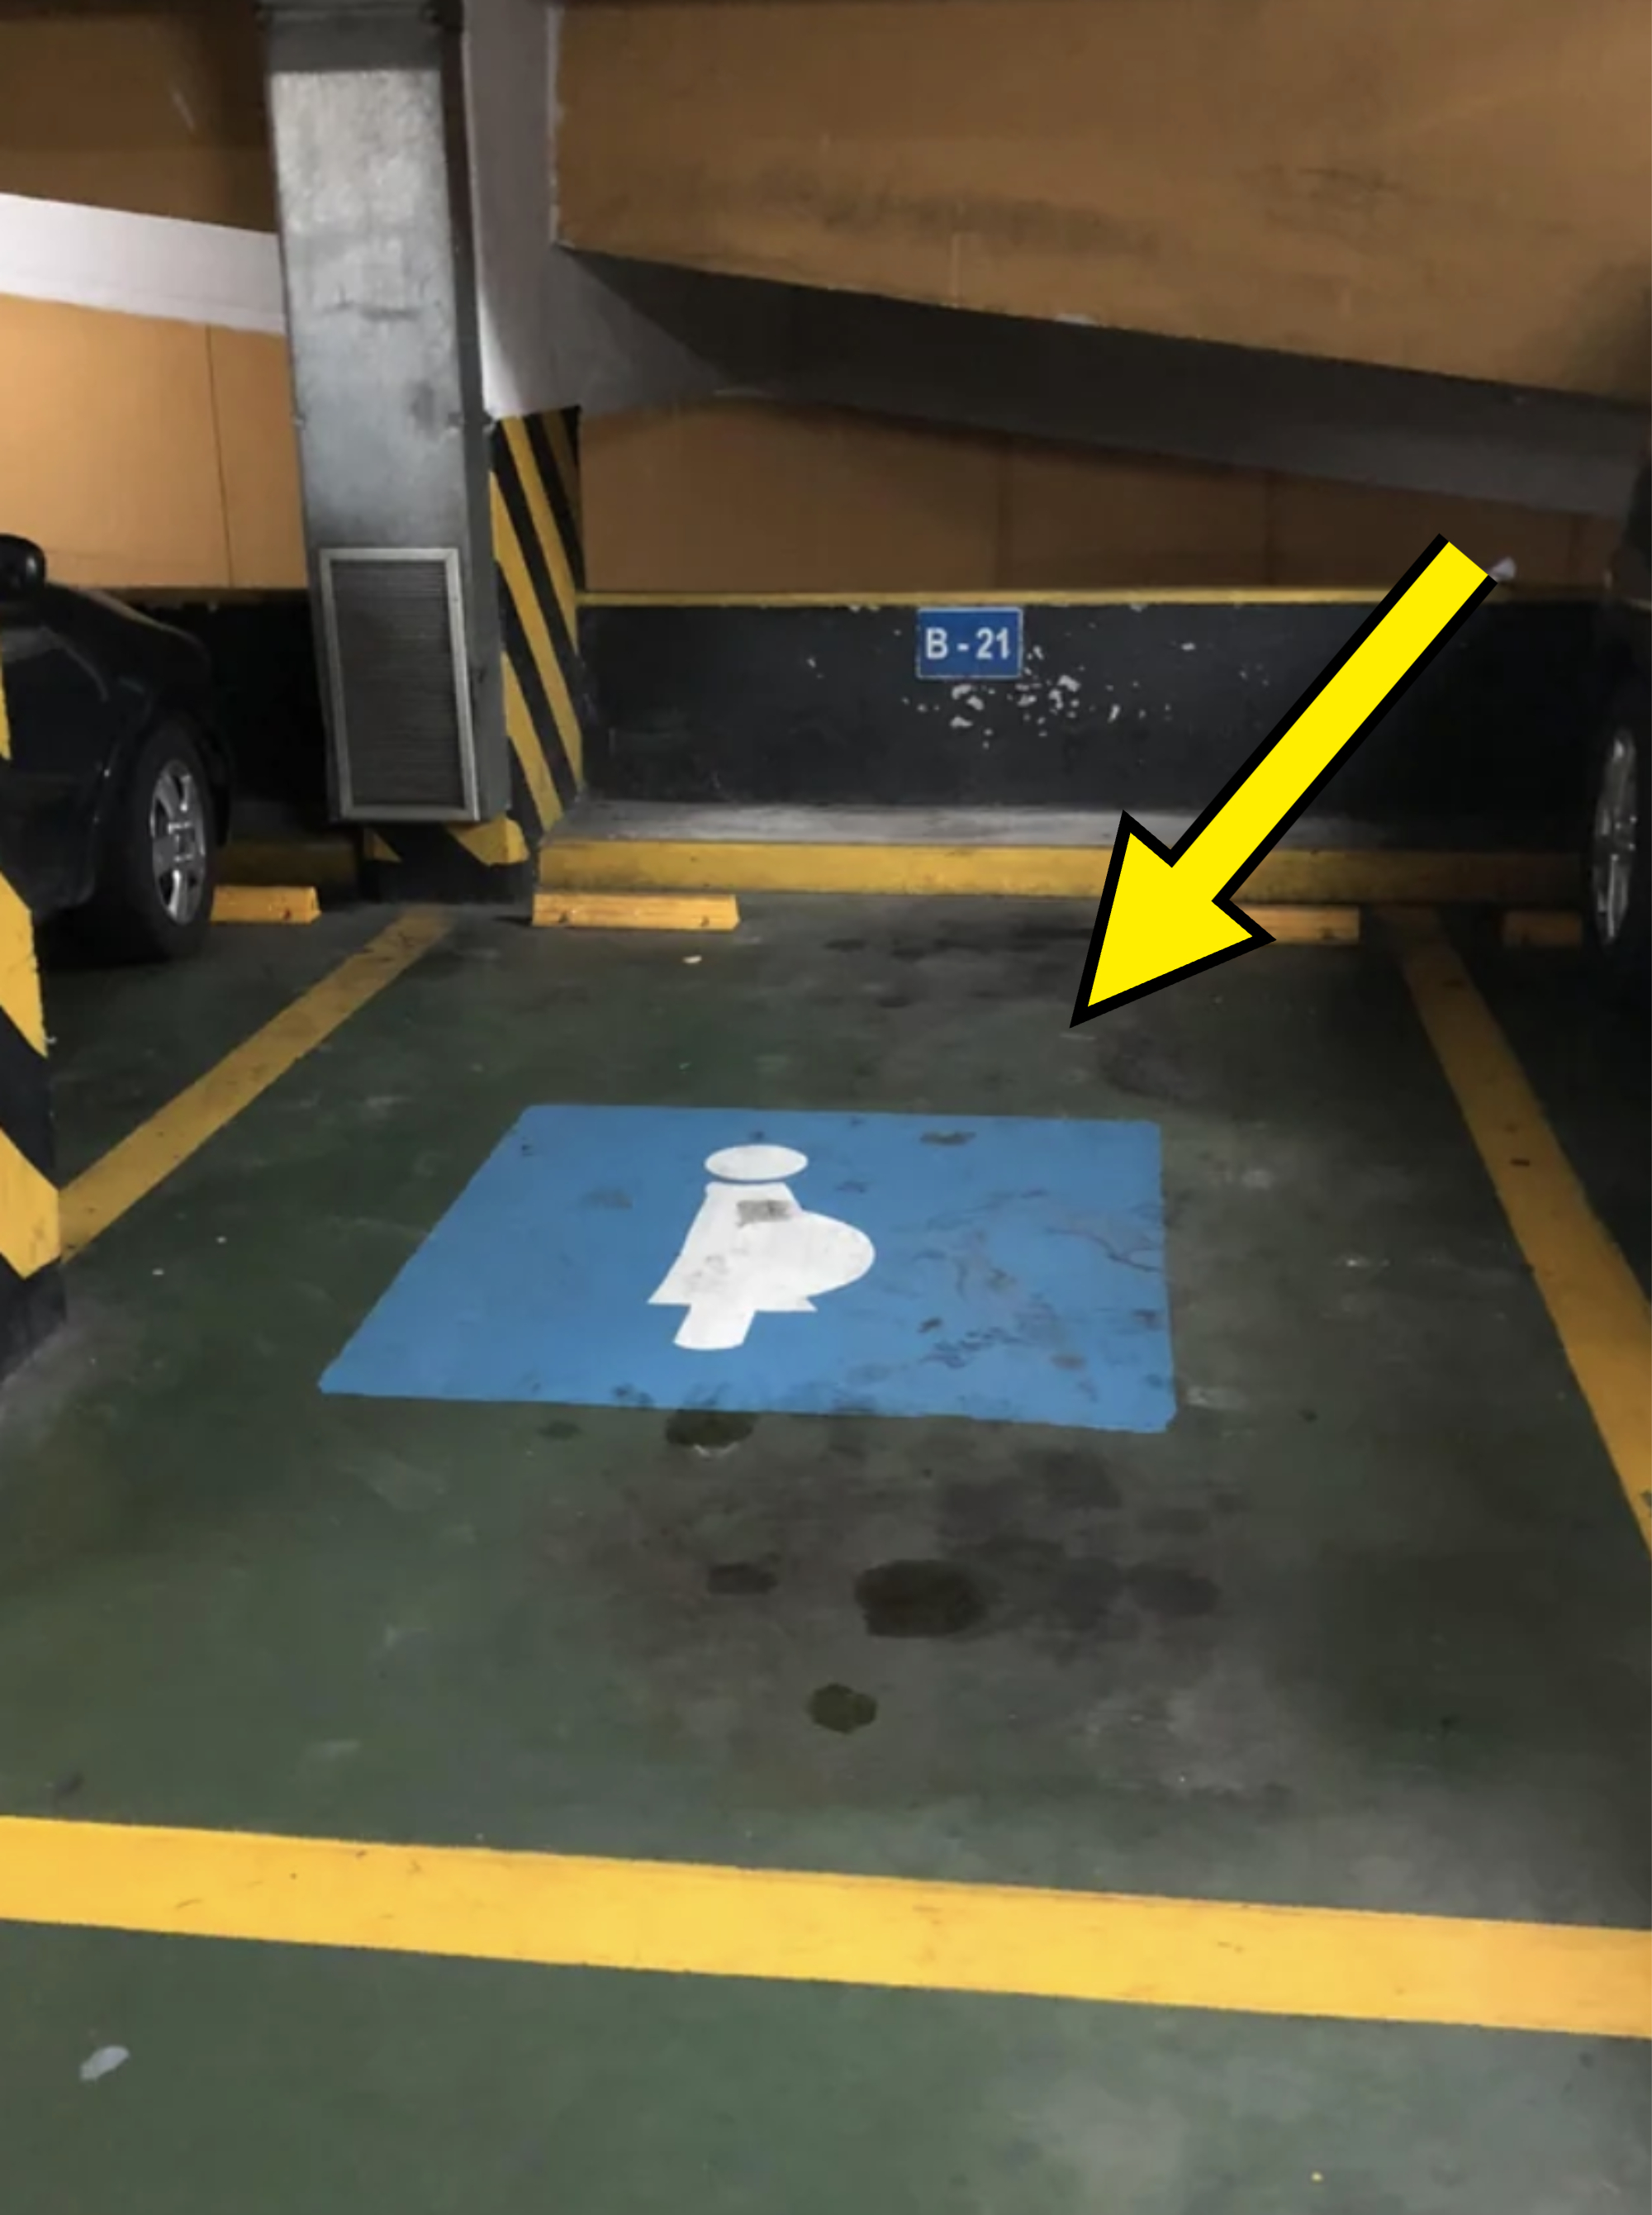 A parking space for expecting mothers